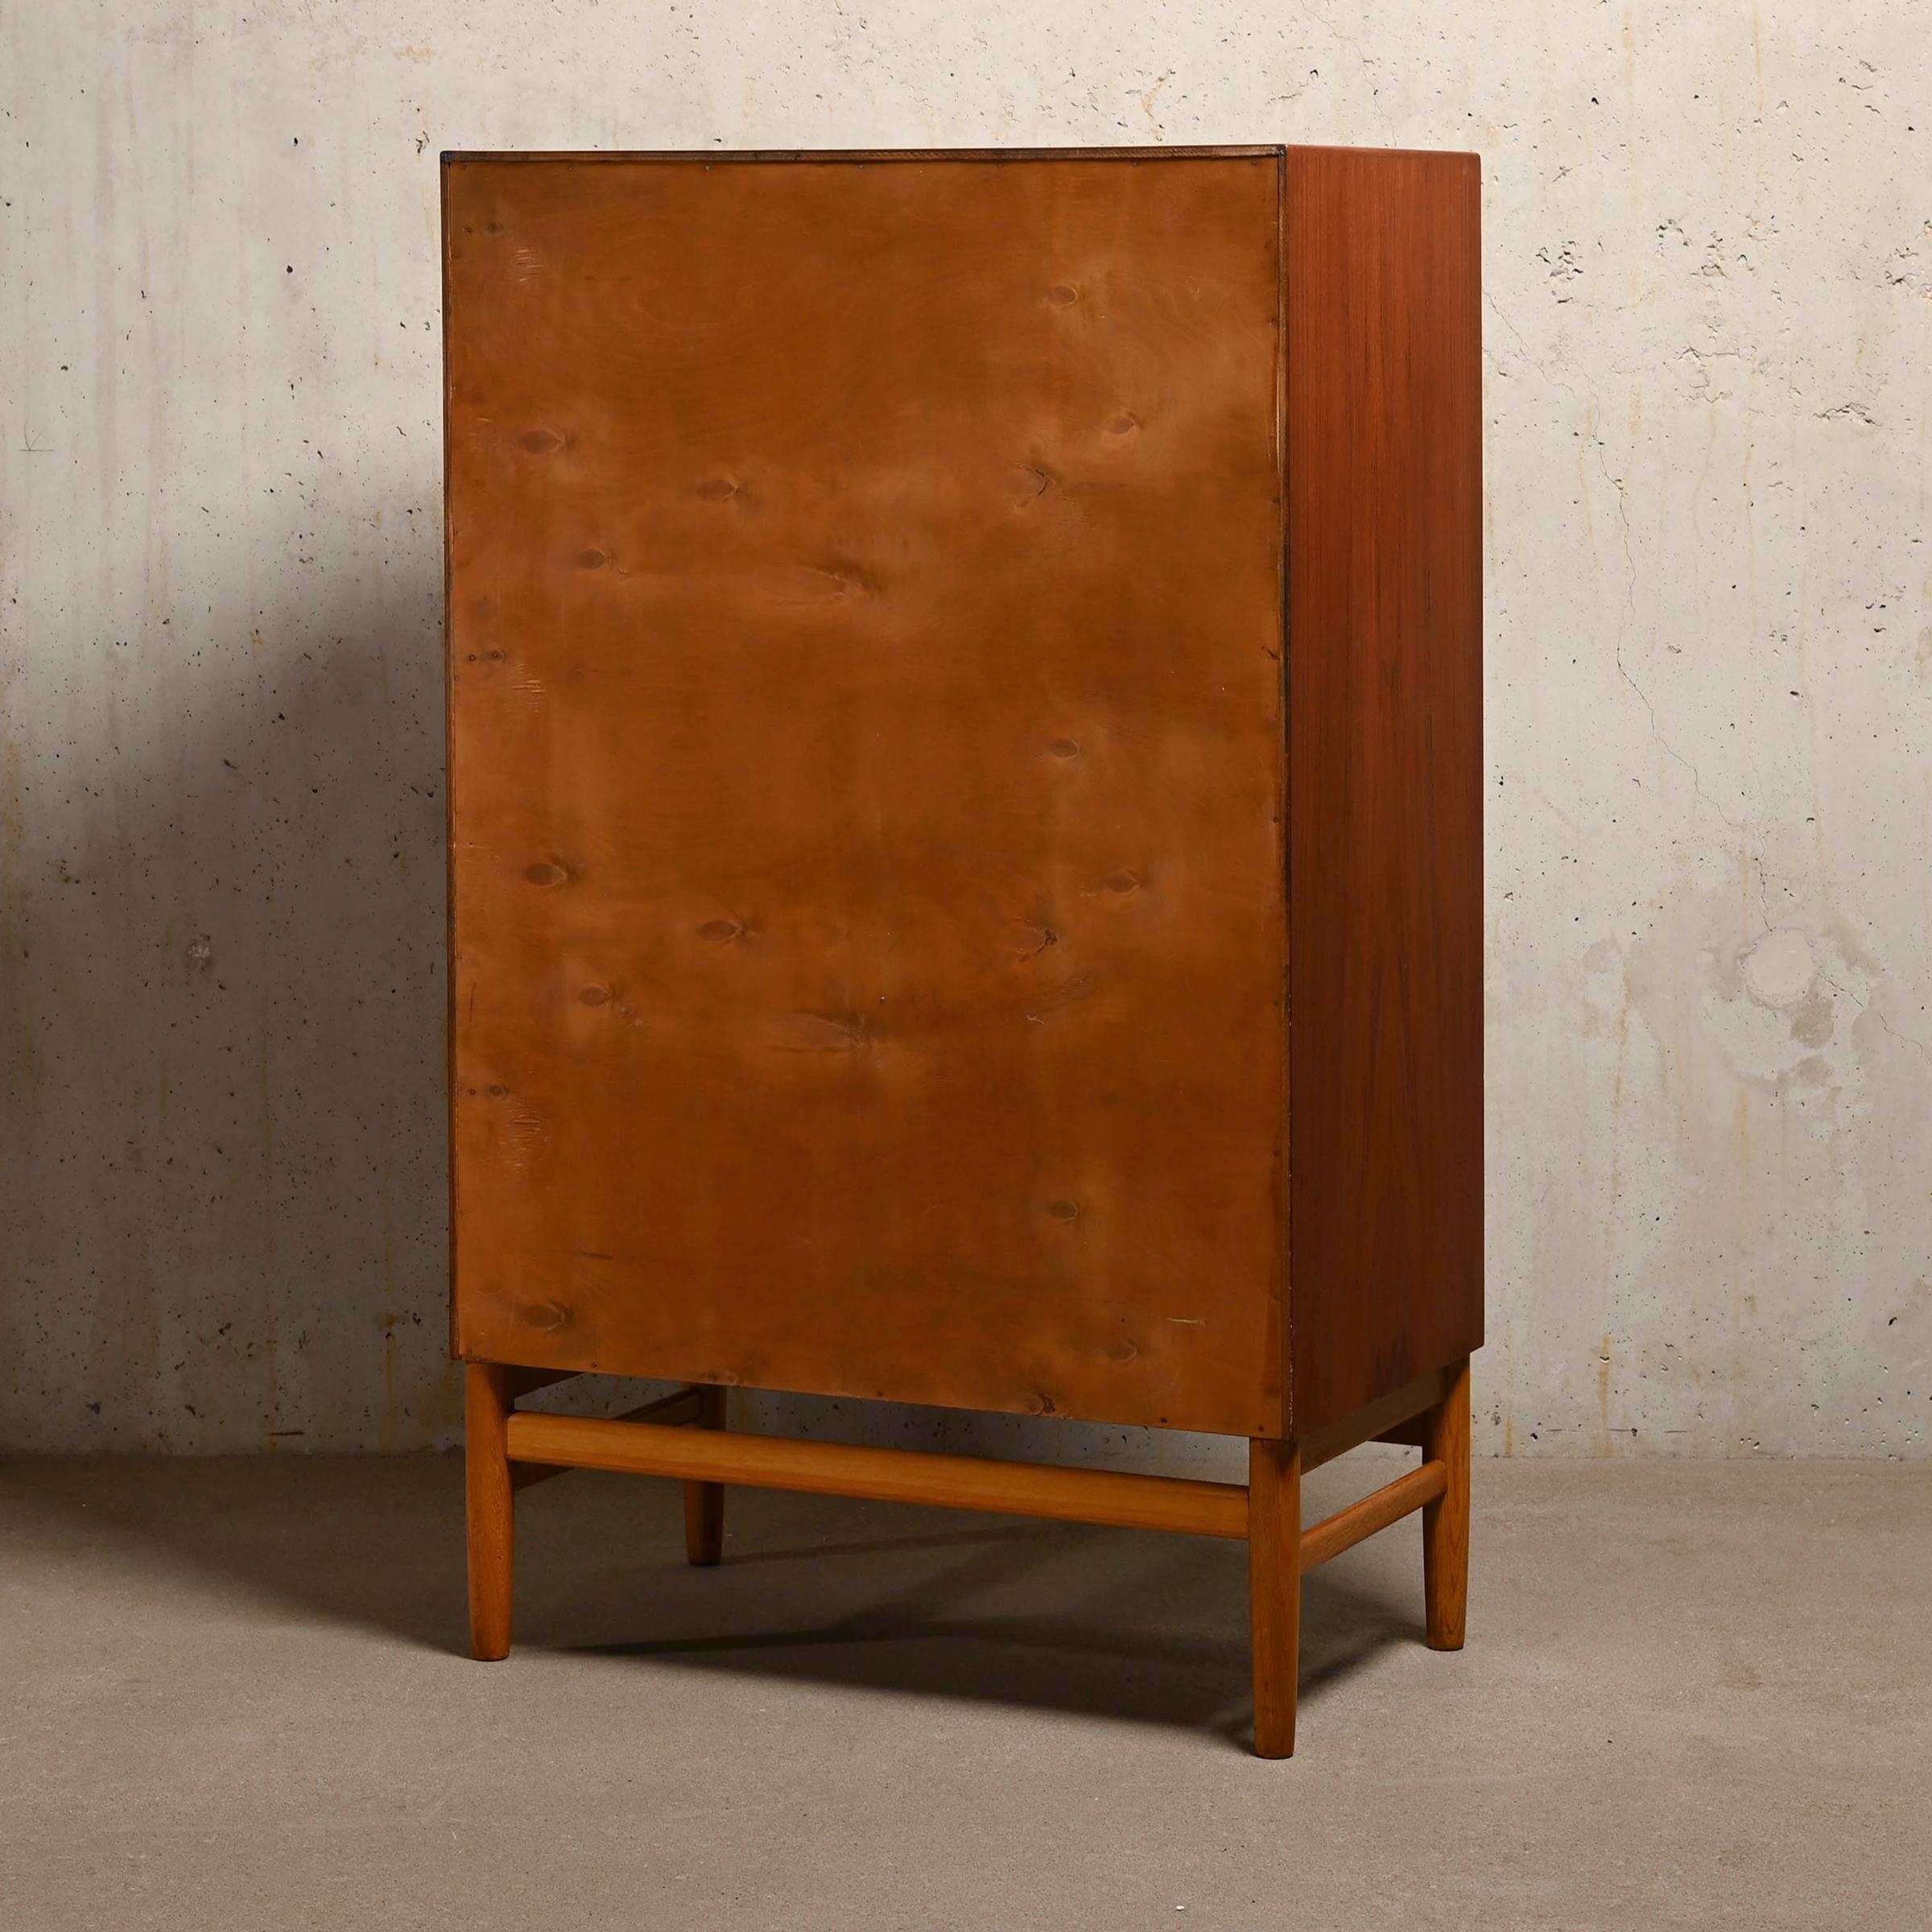 Beech Poul Volther Chest of Drawers, Model F17 in teak and oak for FDB Møbler, Denmark